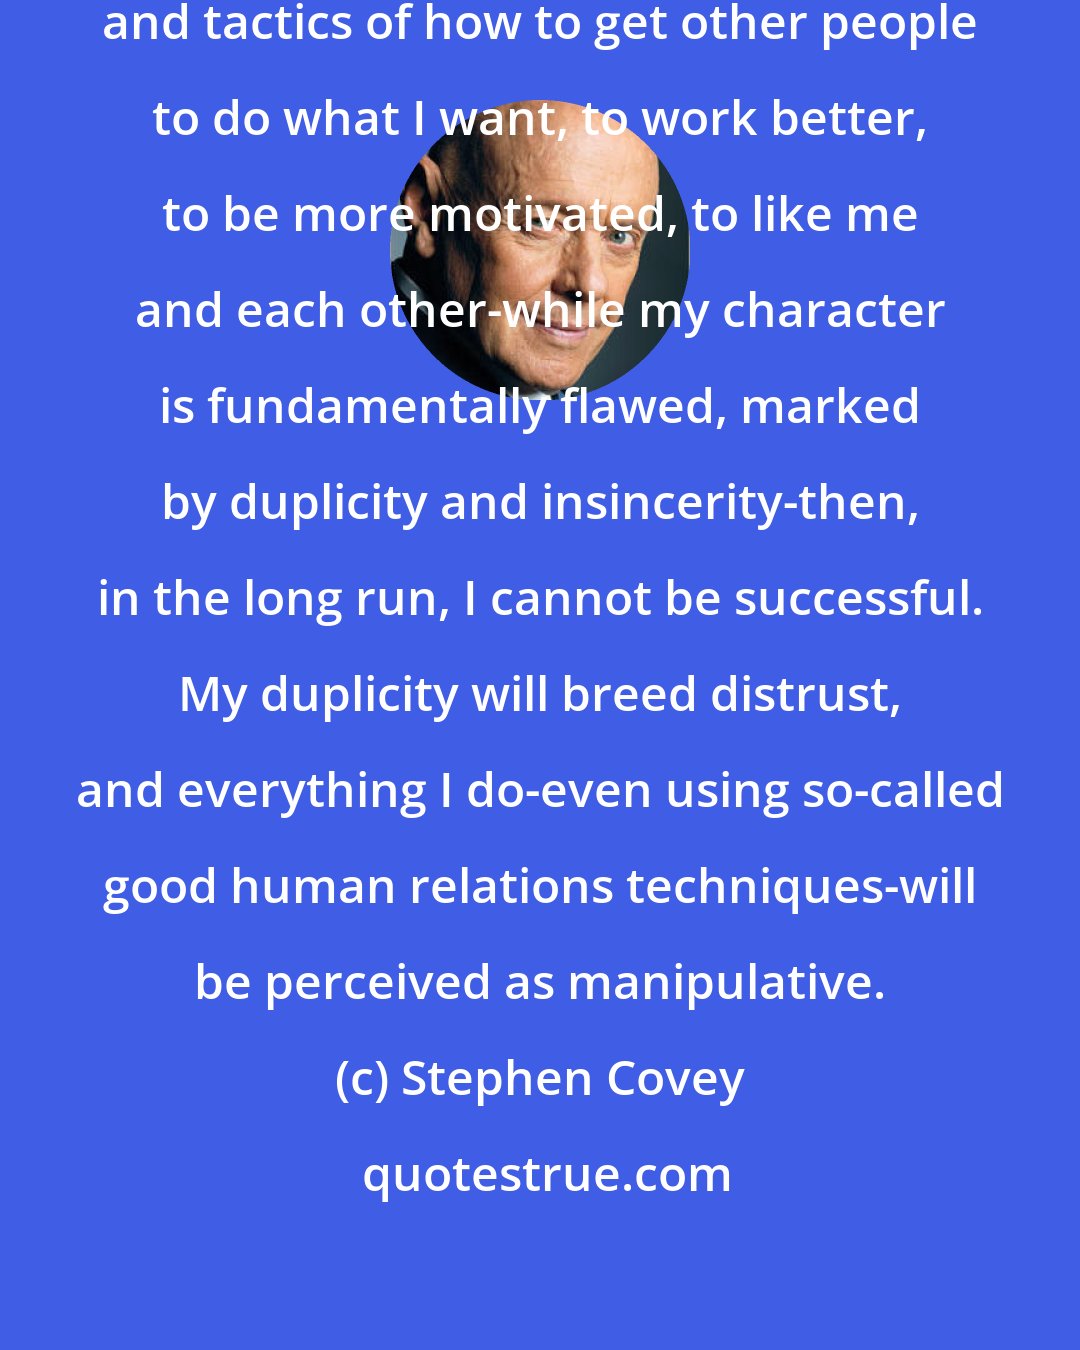 Stephen Covey: If I try to use human influence strategies and tactics of how to get other people to do what I want, to work better, to be more motivated, to like me and each other-while my character is fundamentally flawed, marked by duplicity and insincerity-then, in the long run, I cannot be successful. My duplicity will breed distrust, and everything I do-even using so-called good human relations techniques-will be perceived as manipulative.